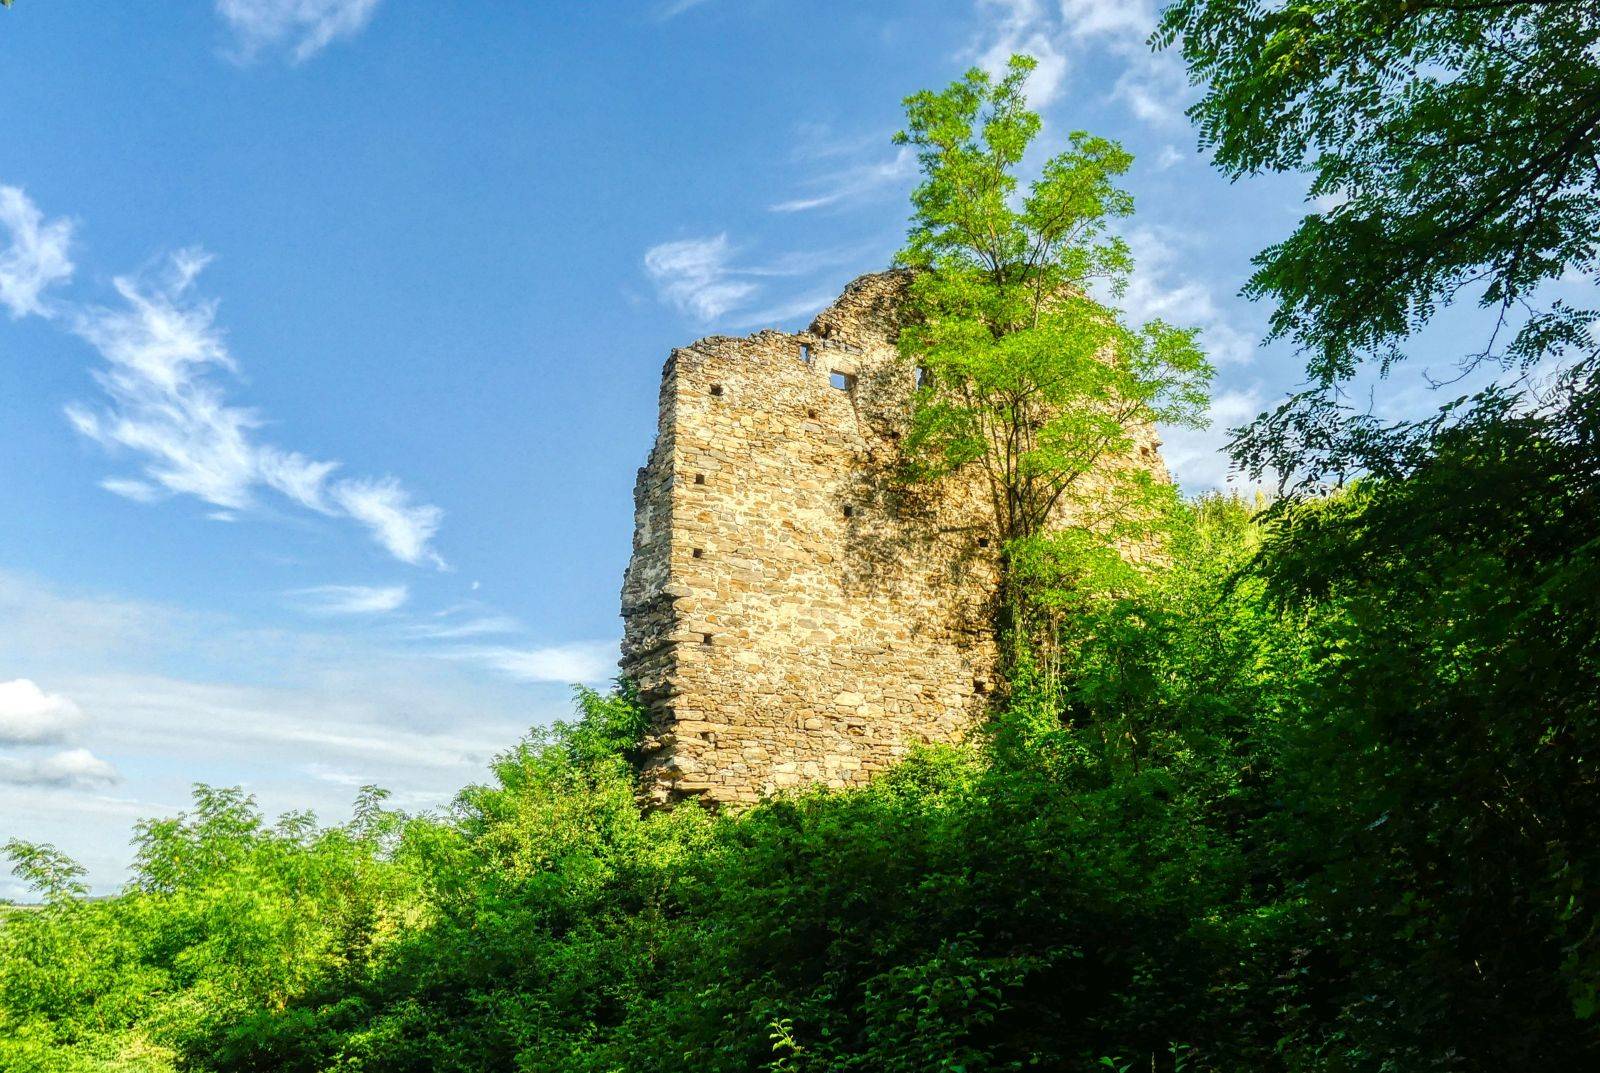 A short hike to the ruins of Schonenburg castle